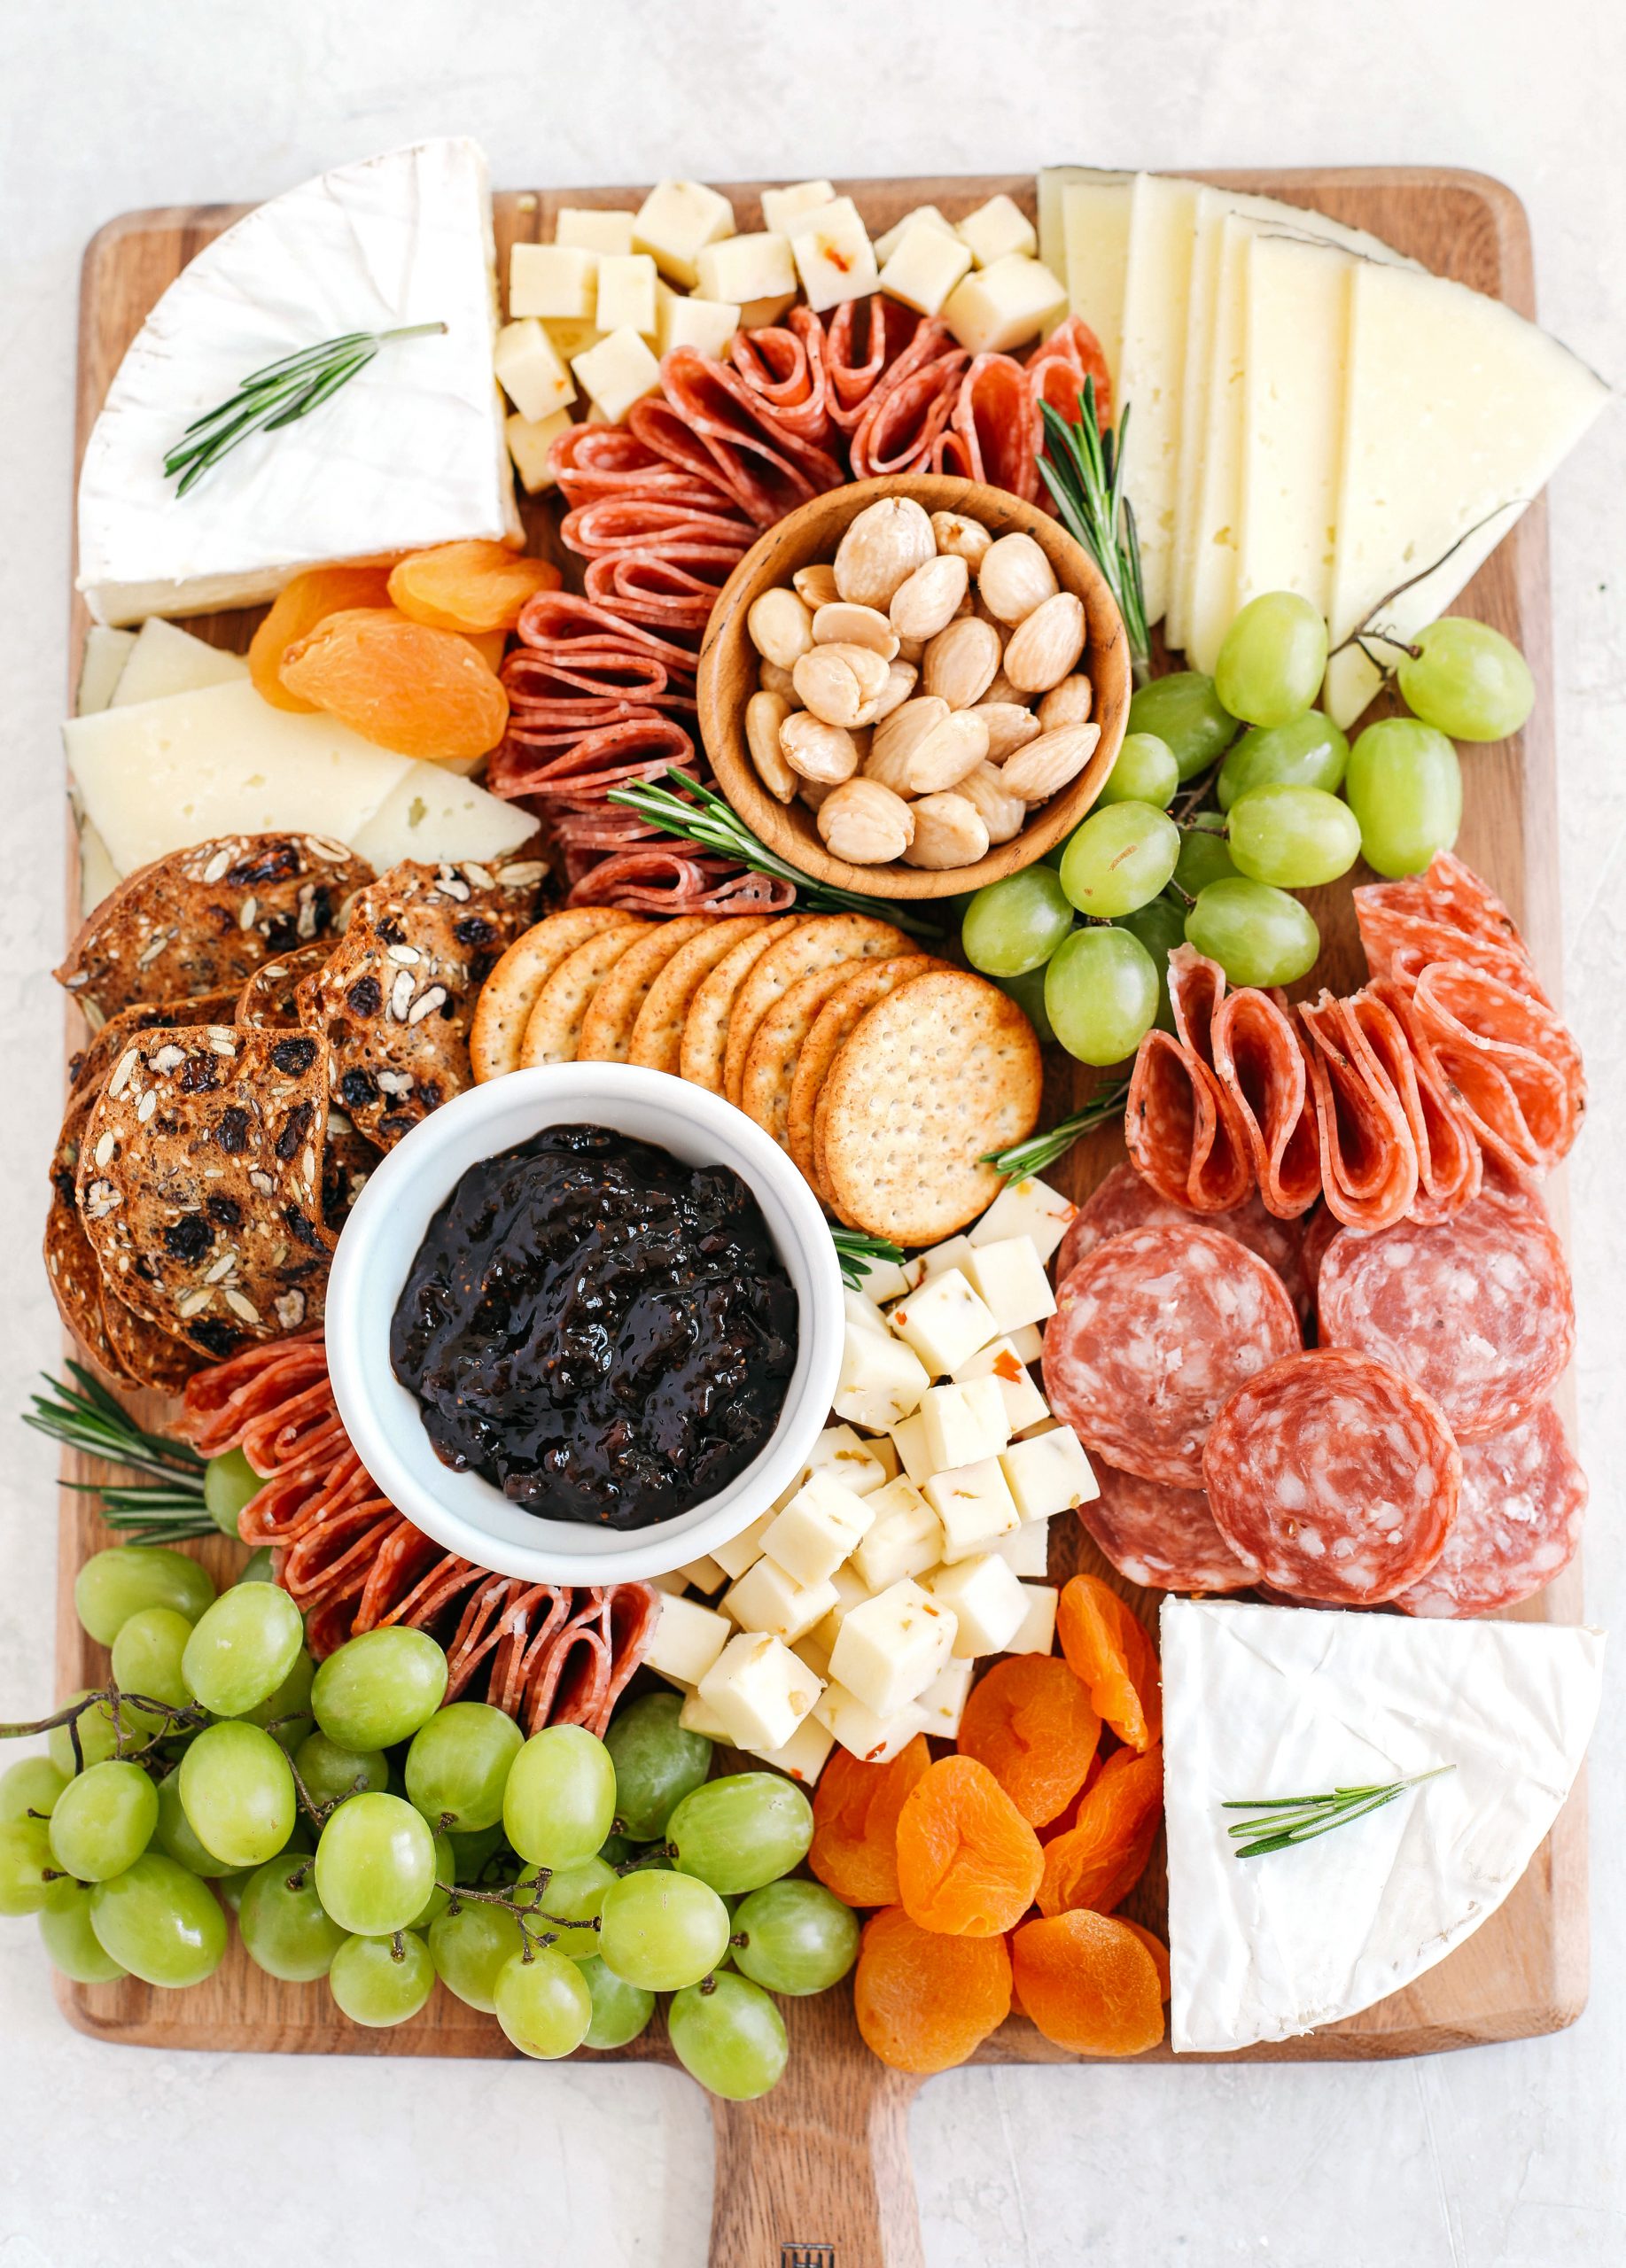 My favorite tips and tricks for building a perfect cheeseboard with all your favorite charcuterie that is simple, beautiful and made in just minutes!